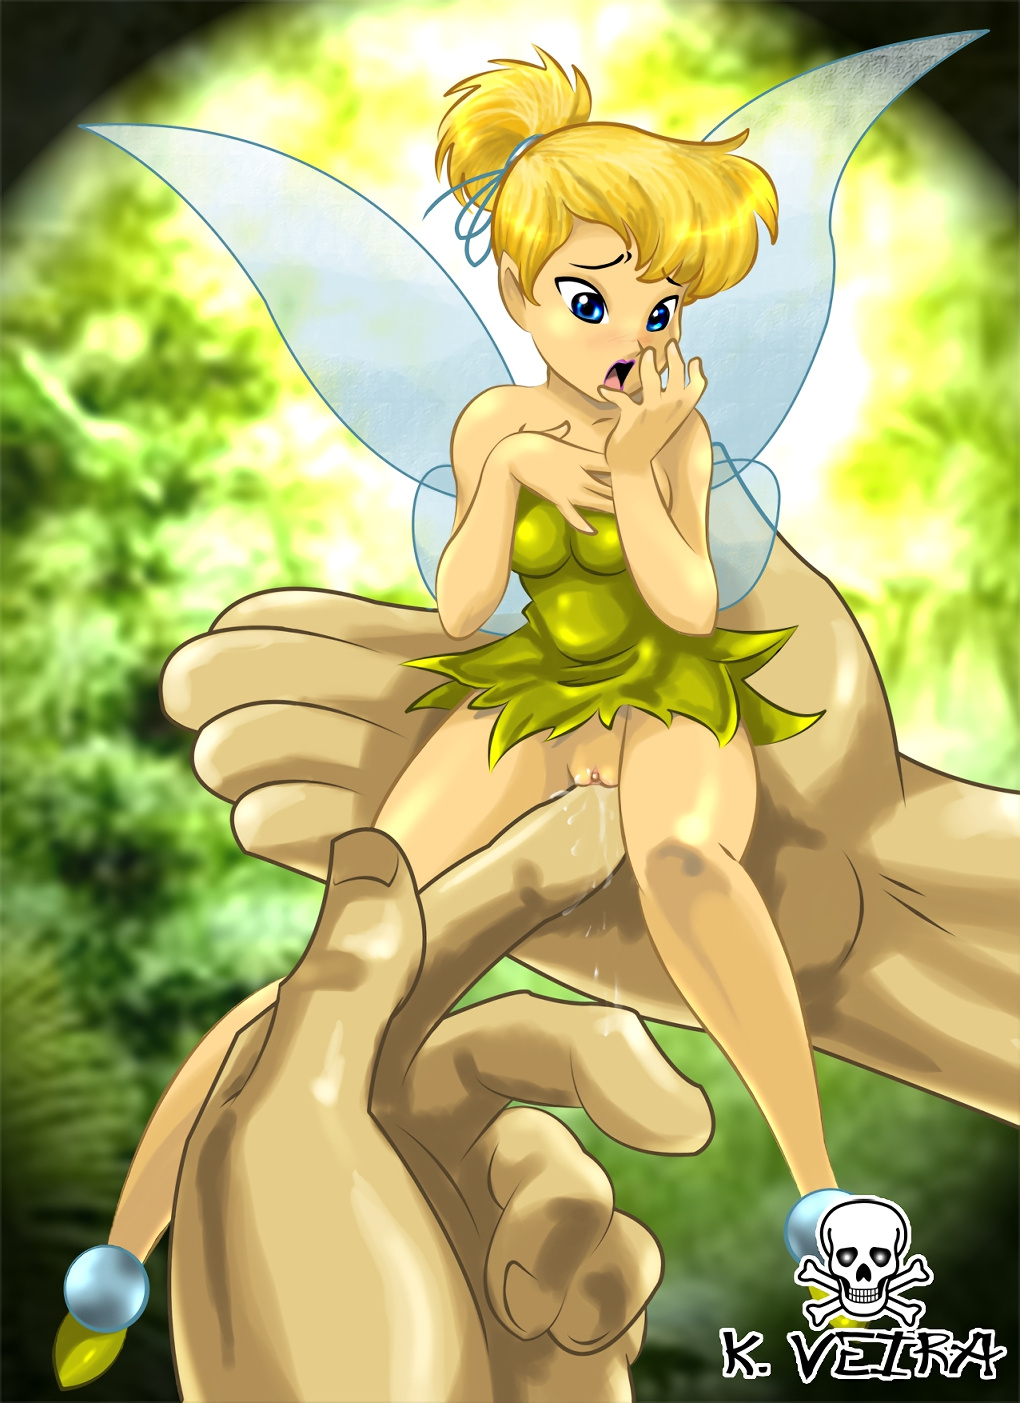 Nude Tinkerbell Cartoons - Tinker Bell cartoon porn naked pictures collection | Toon Porn Blog